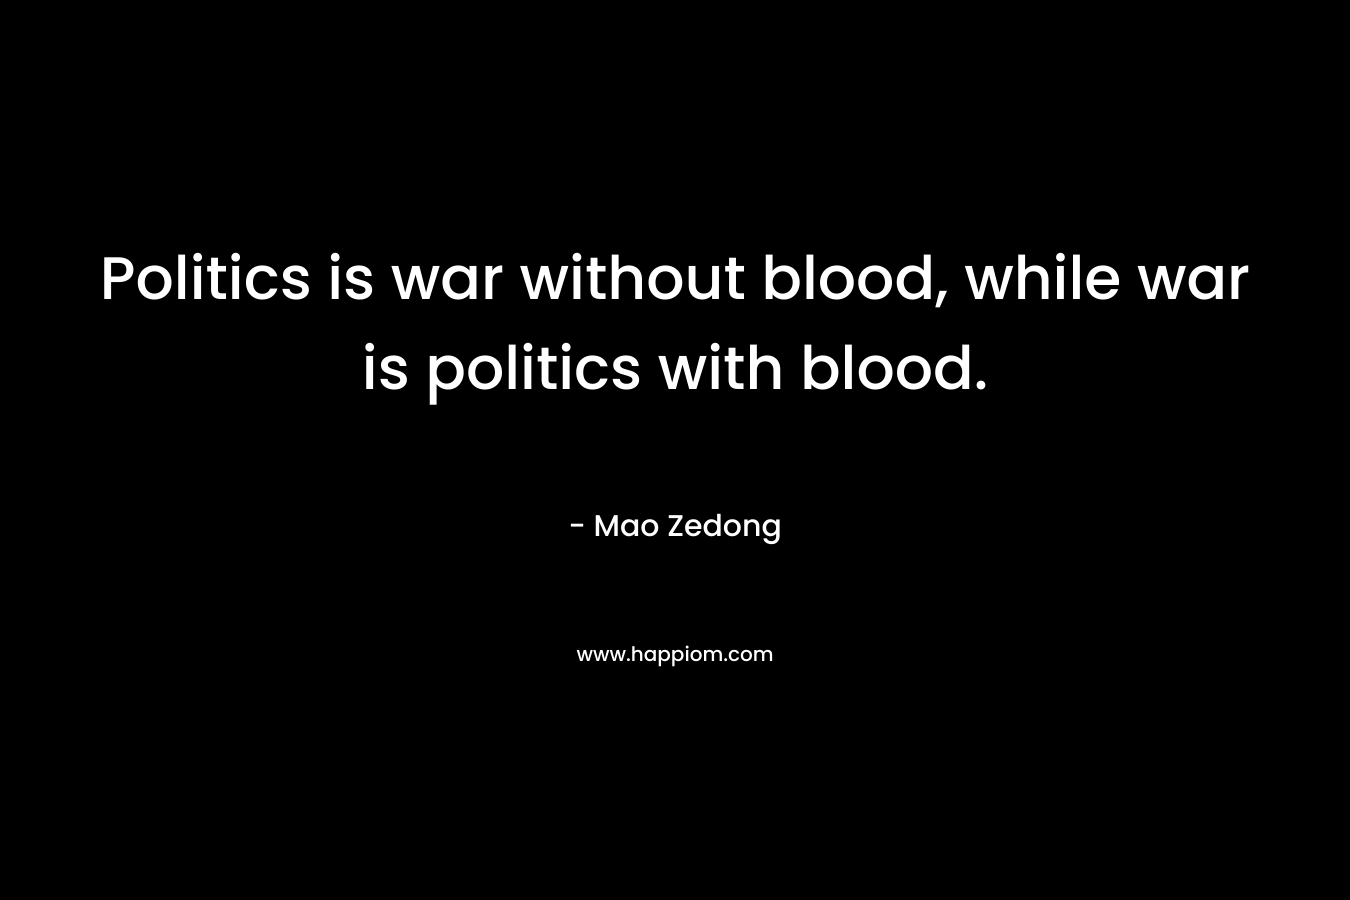 Politics is war without blood, while war is politics with blood.